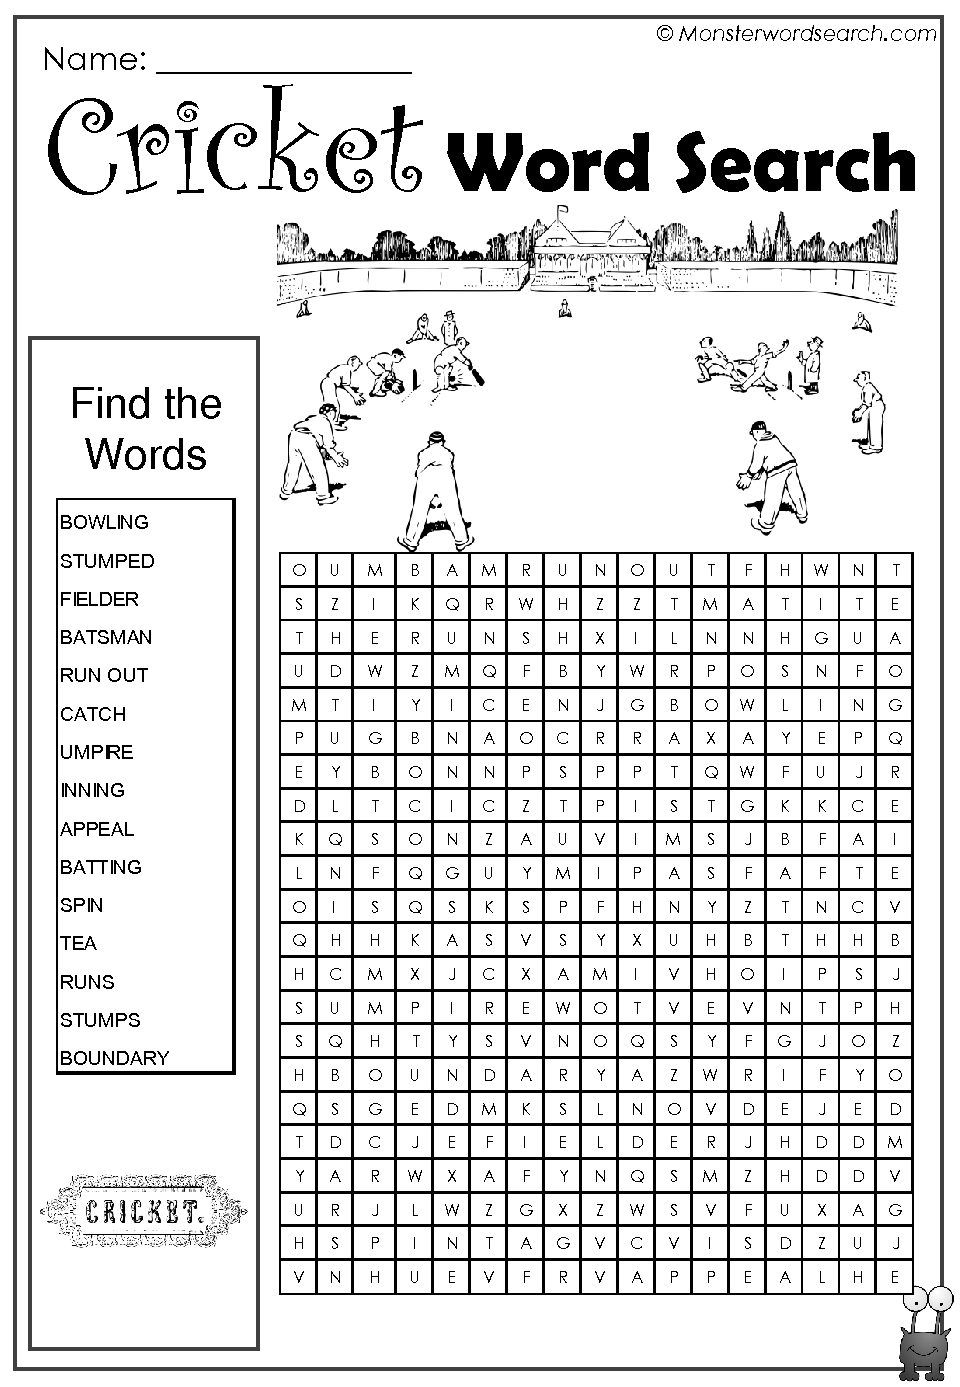 Awesome Cricket Word Search | Word Search | Cricket, Word Games - Crossword Puzzles Printable 1980S